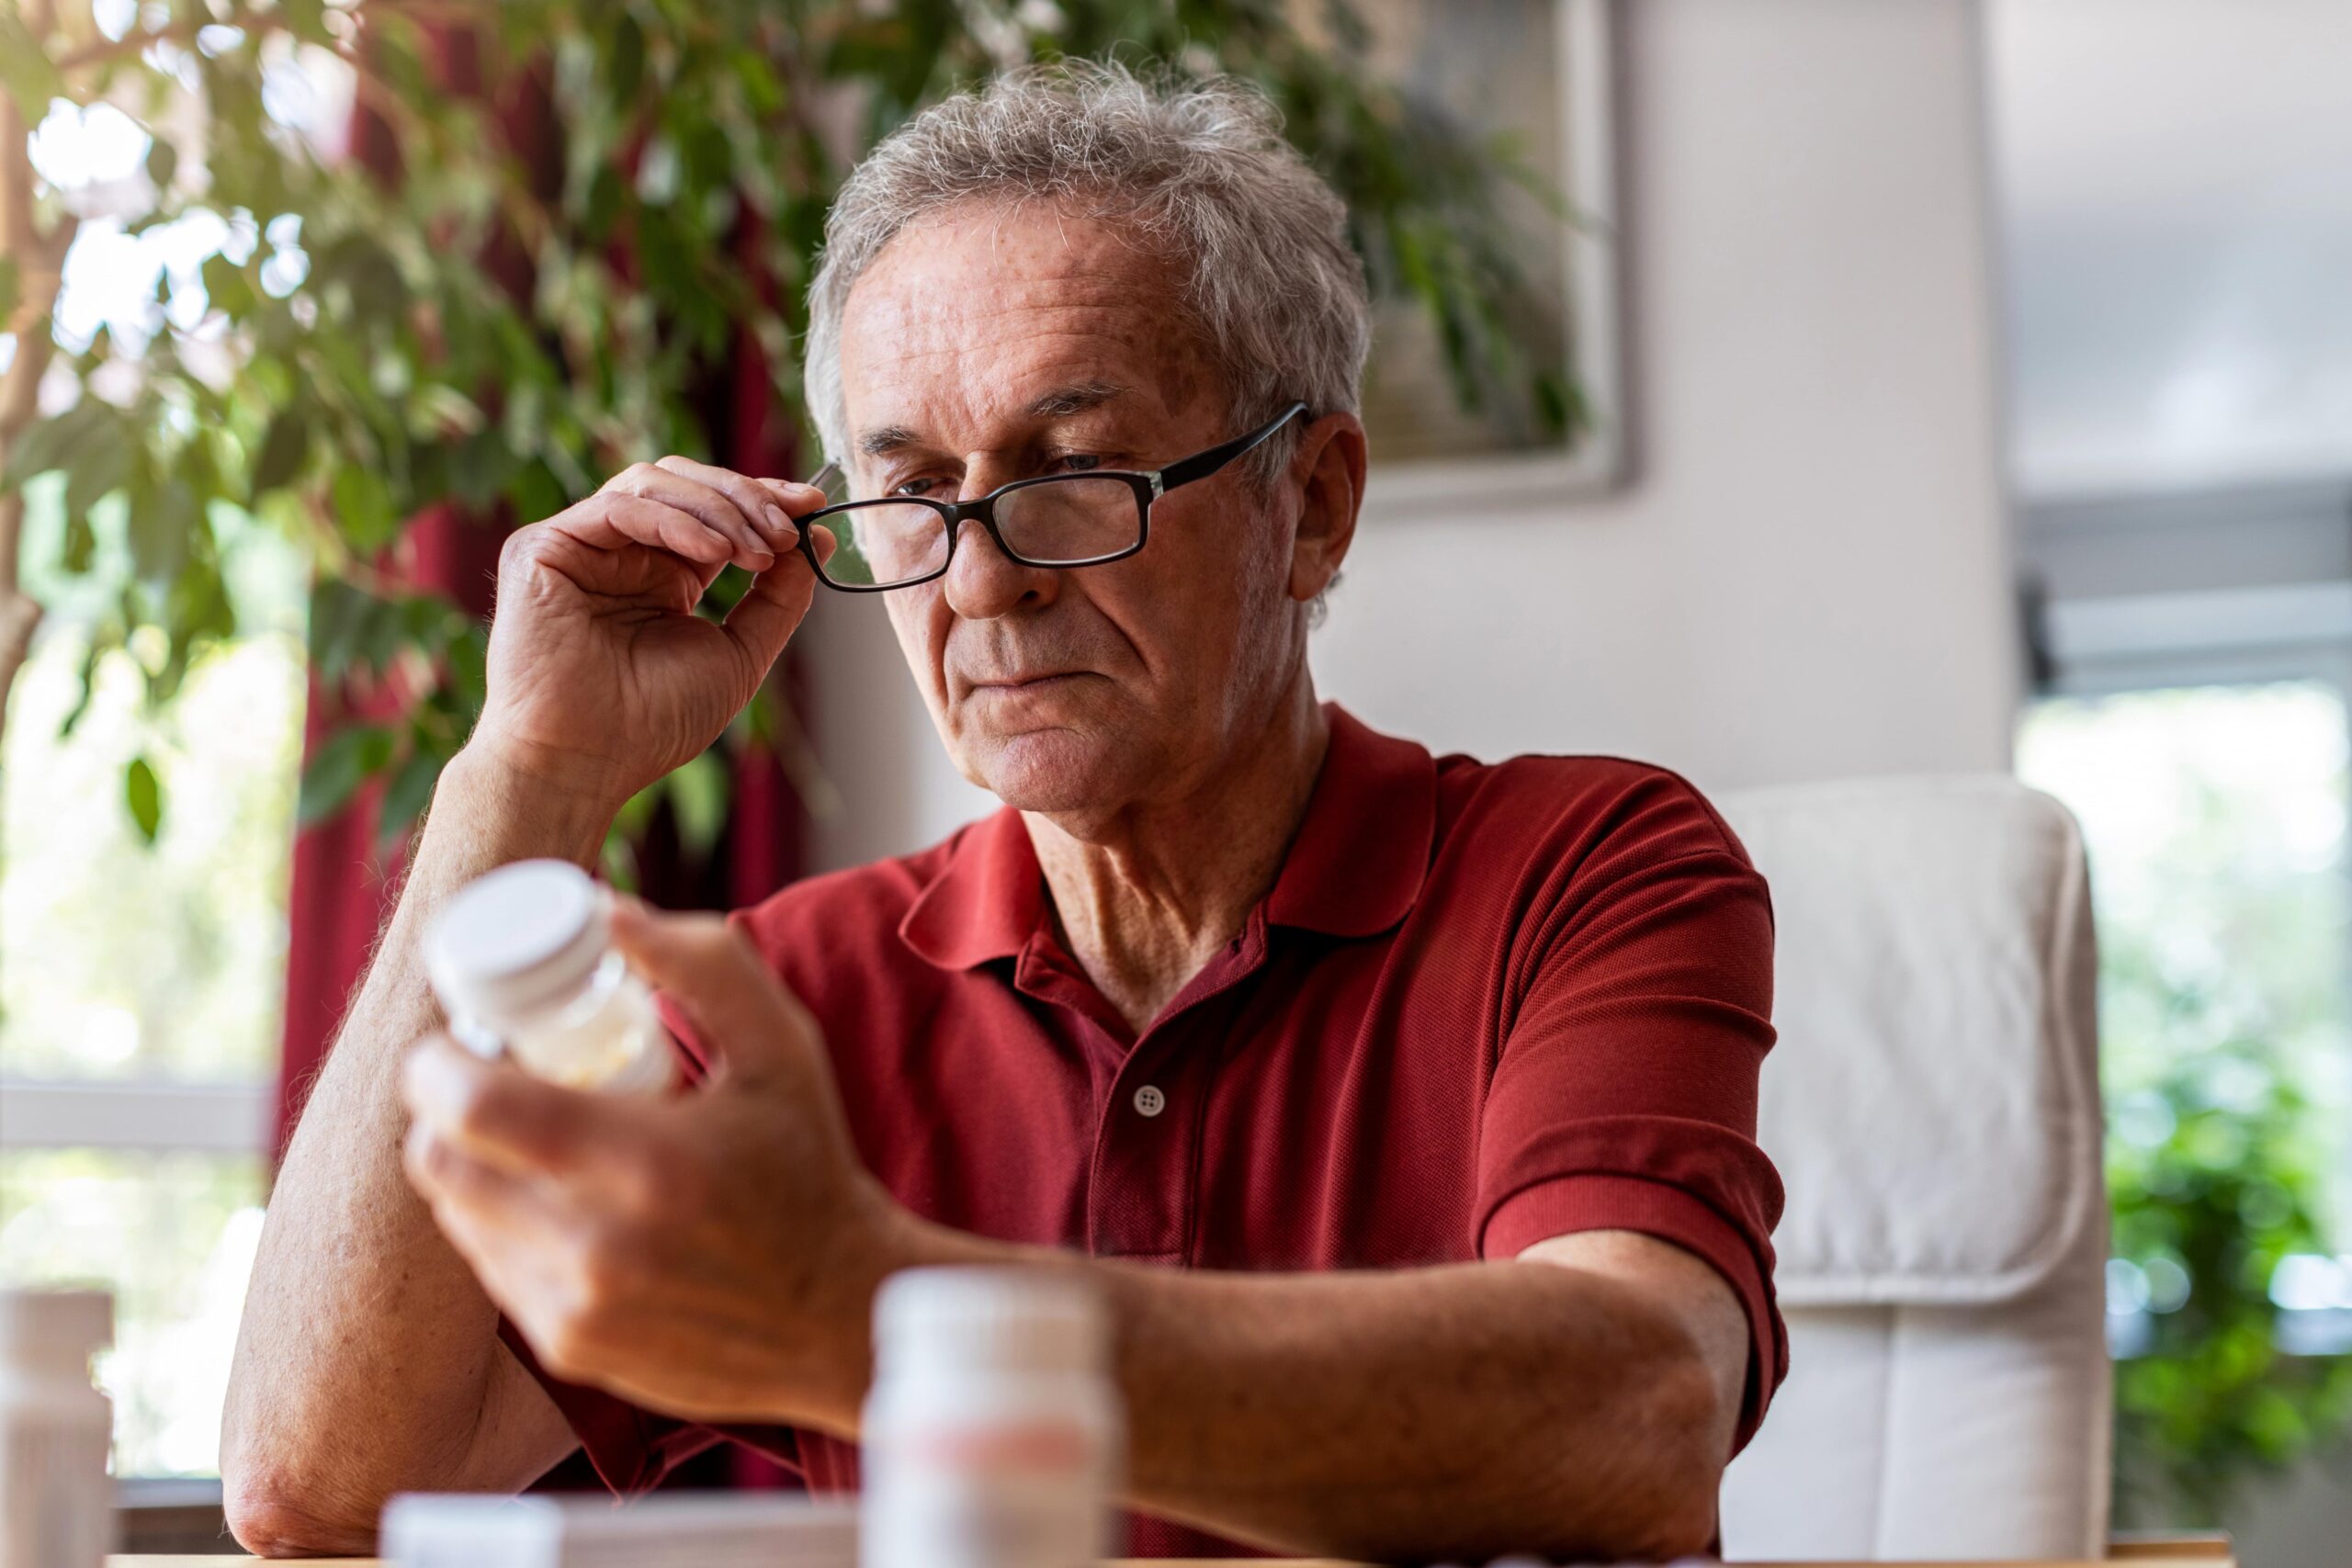 Man looking at his benzo prescription wondering if it is safe